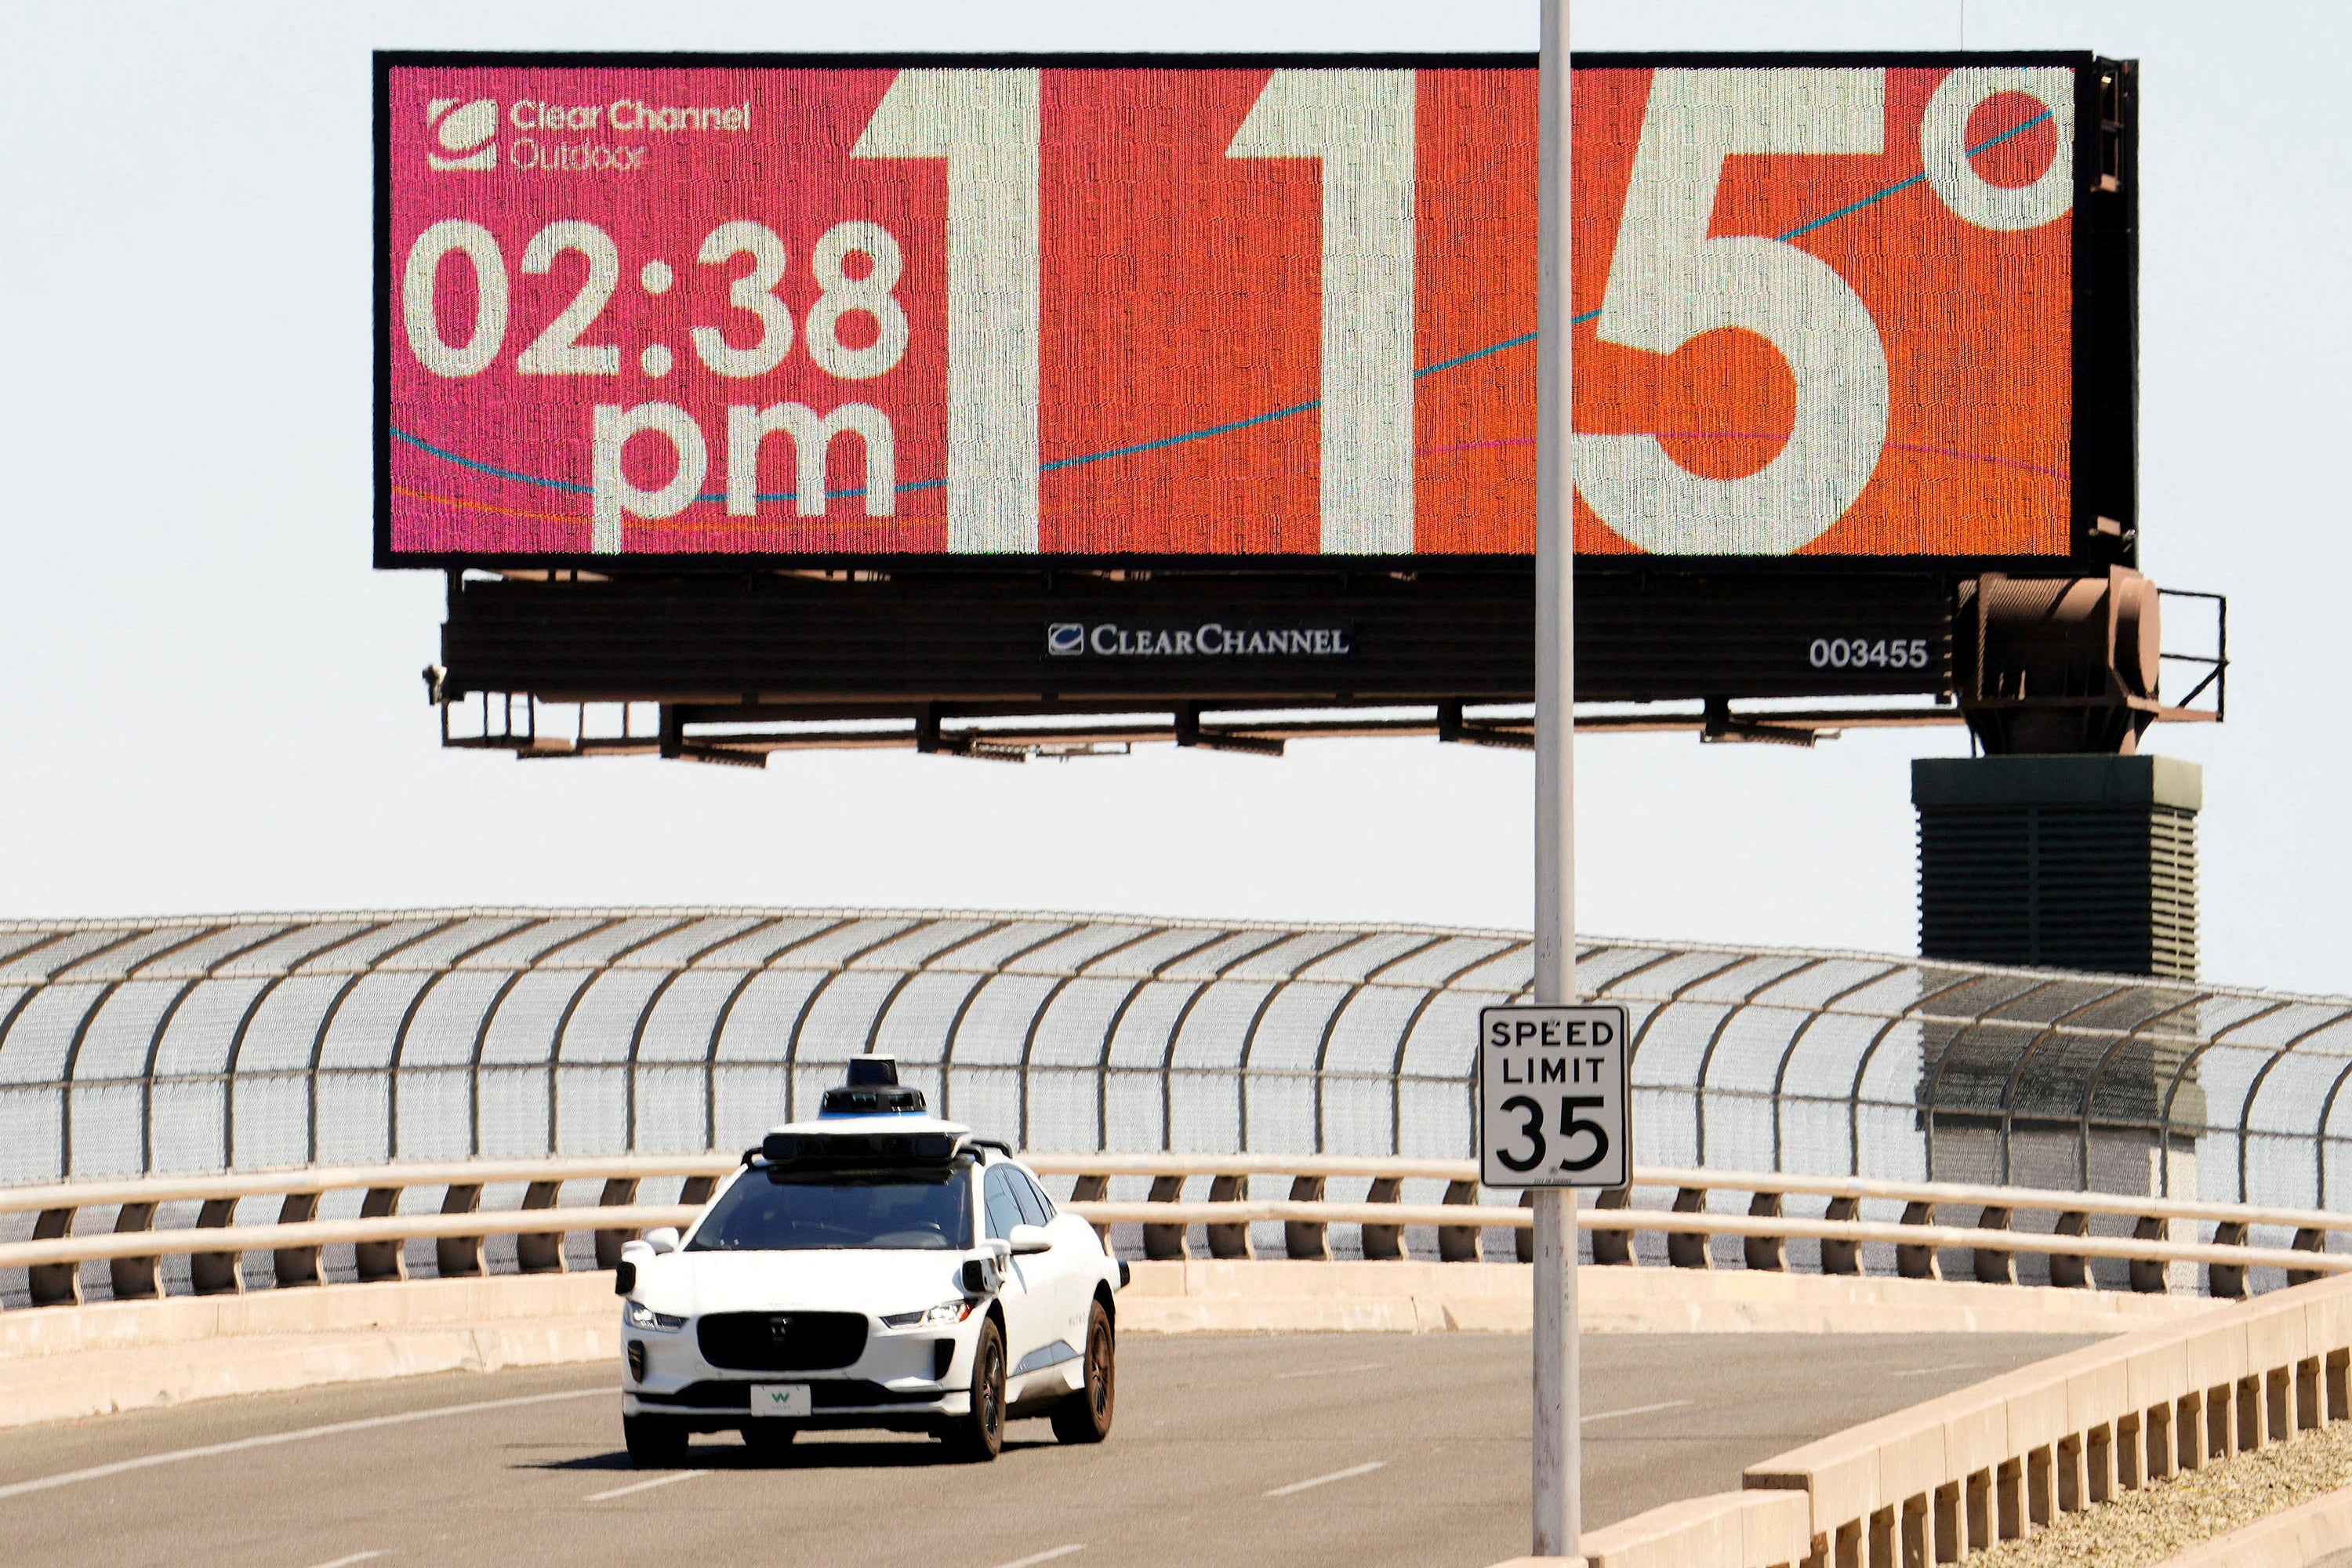 A Waymo self-driving car on Seventh Street as the temperature of 115 degrees is displayed on a digital billboard in downtown Phoenix, Arizona on Monday